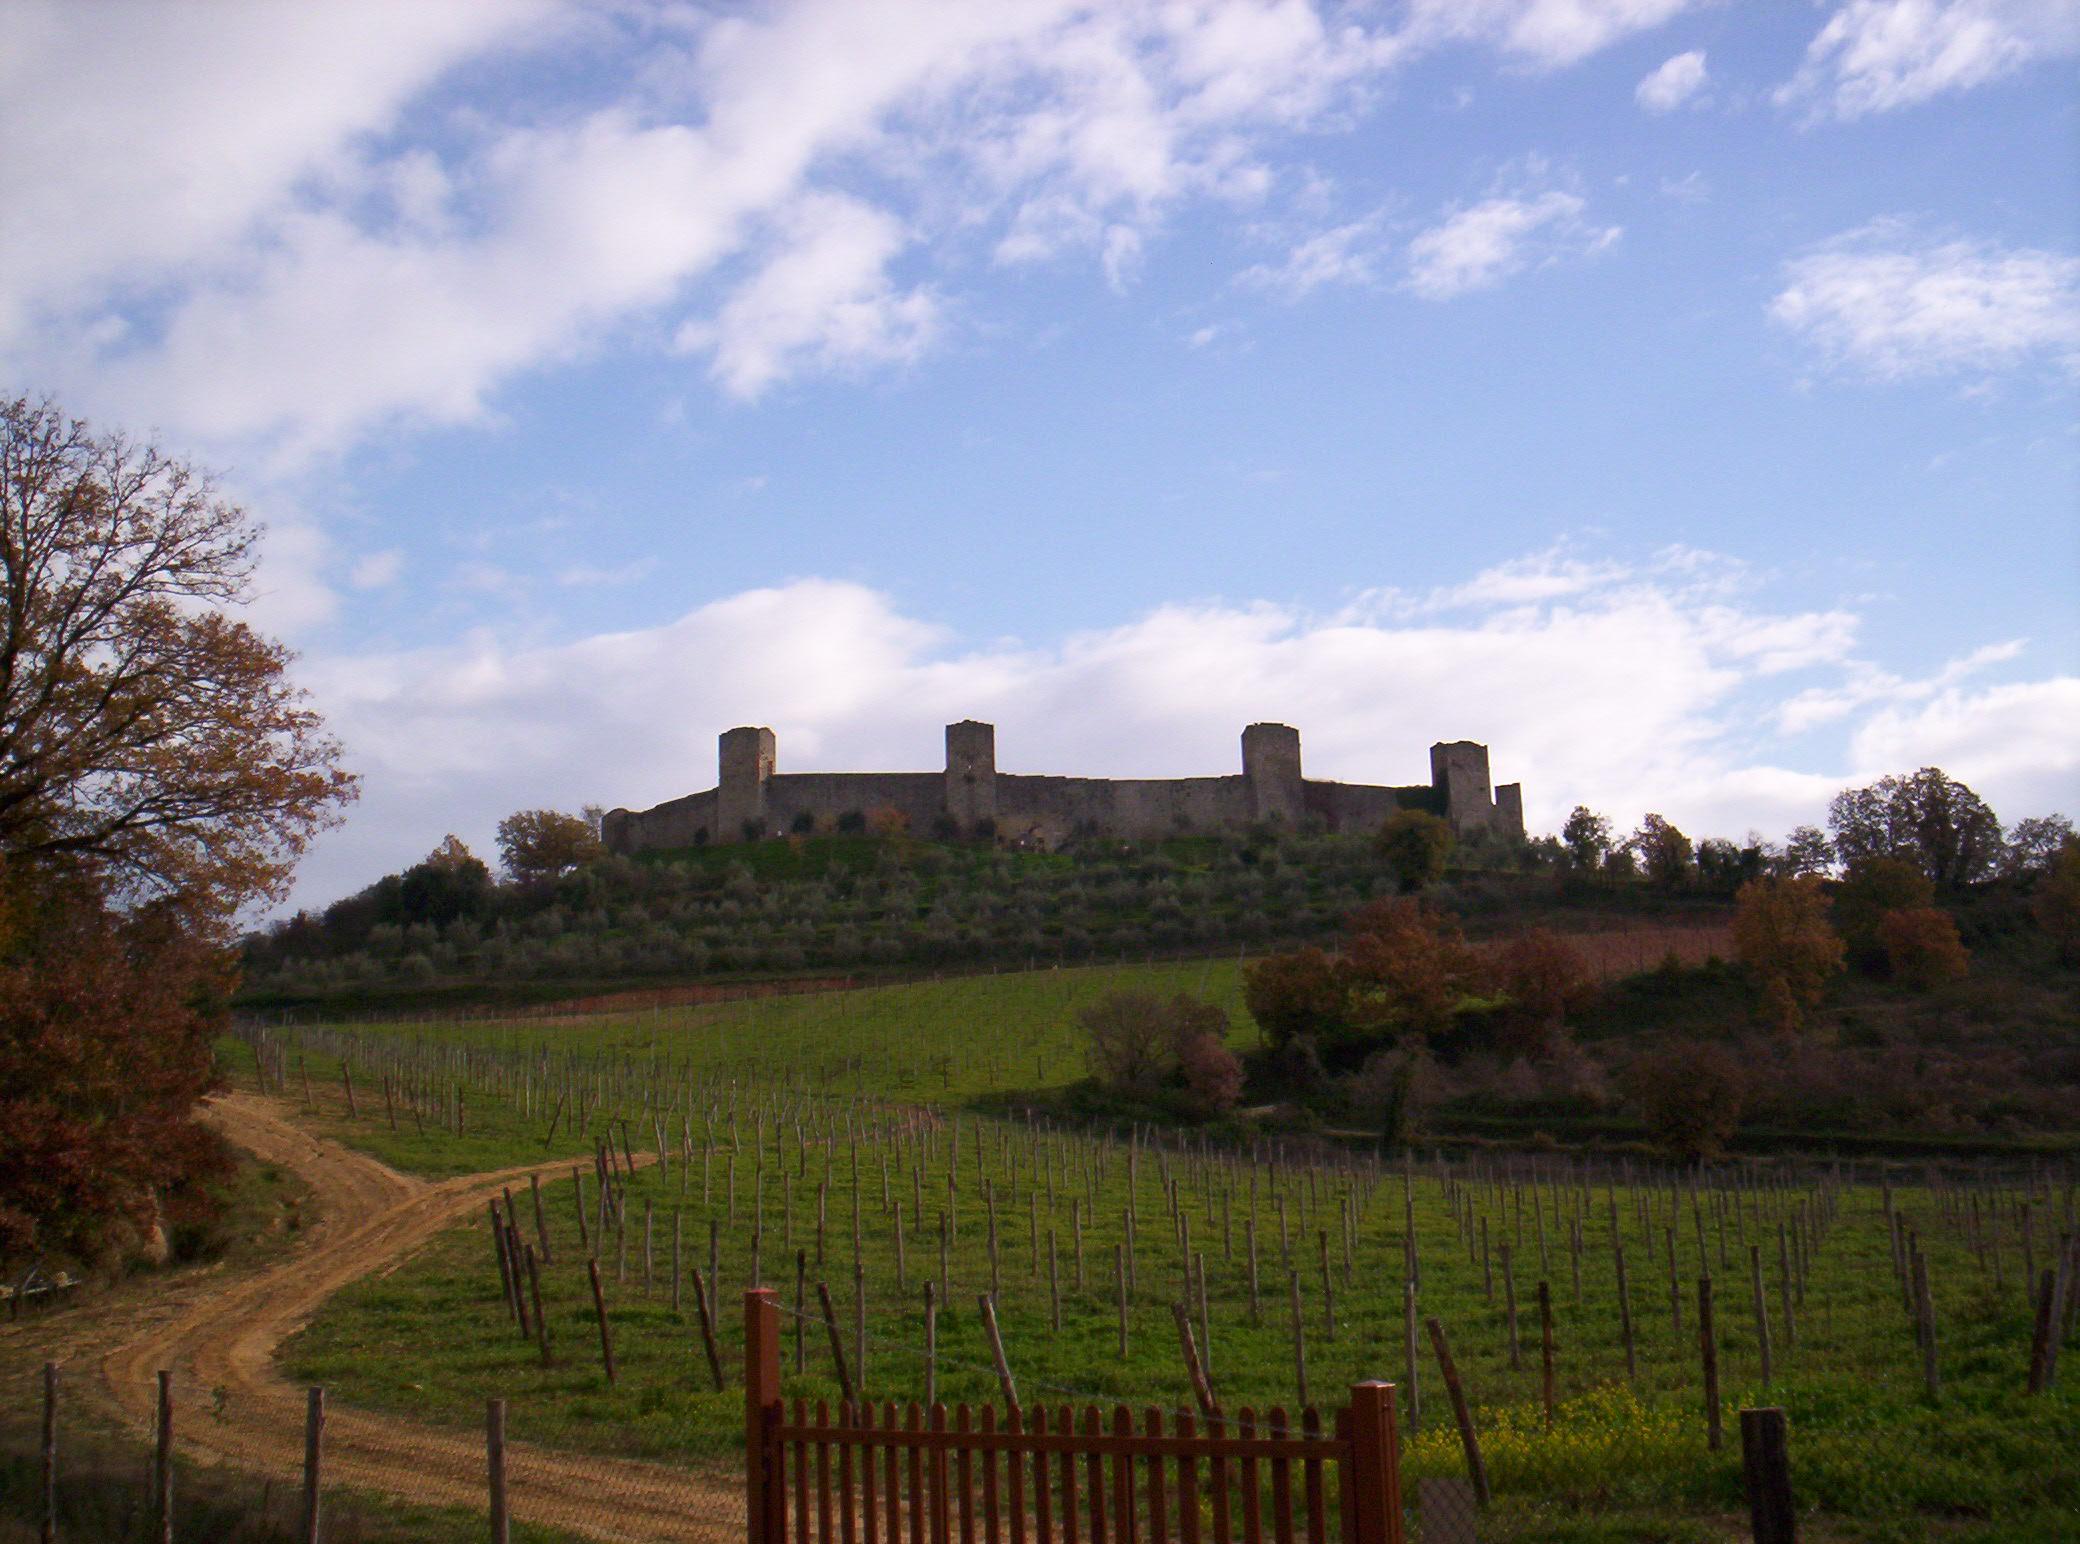 Country side view of a dirt road through a vineyard leading to an old castle